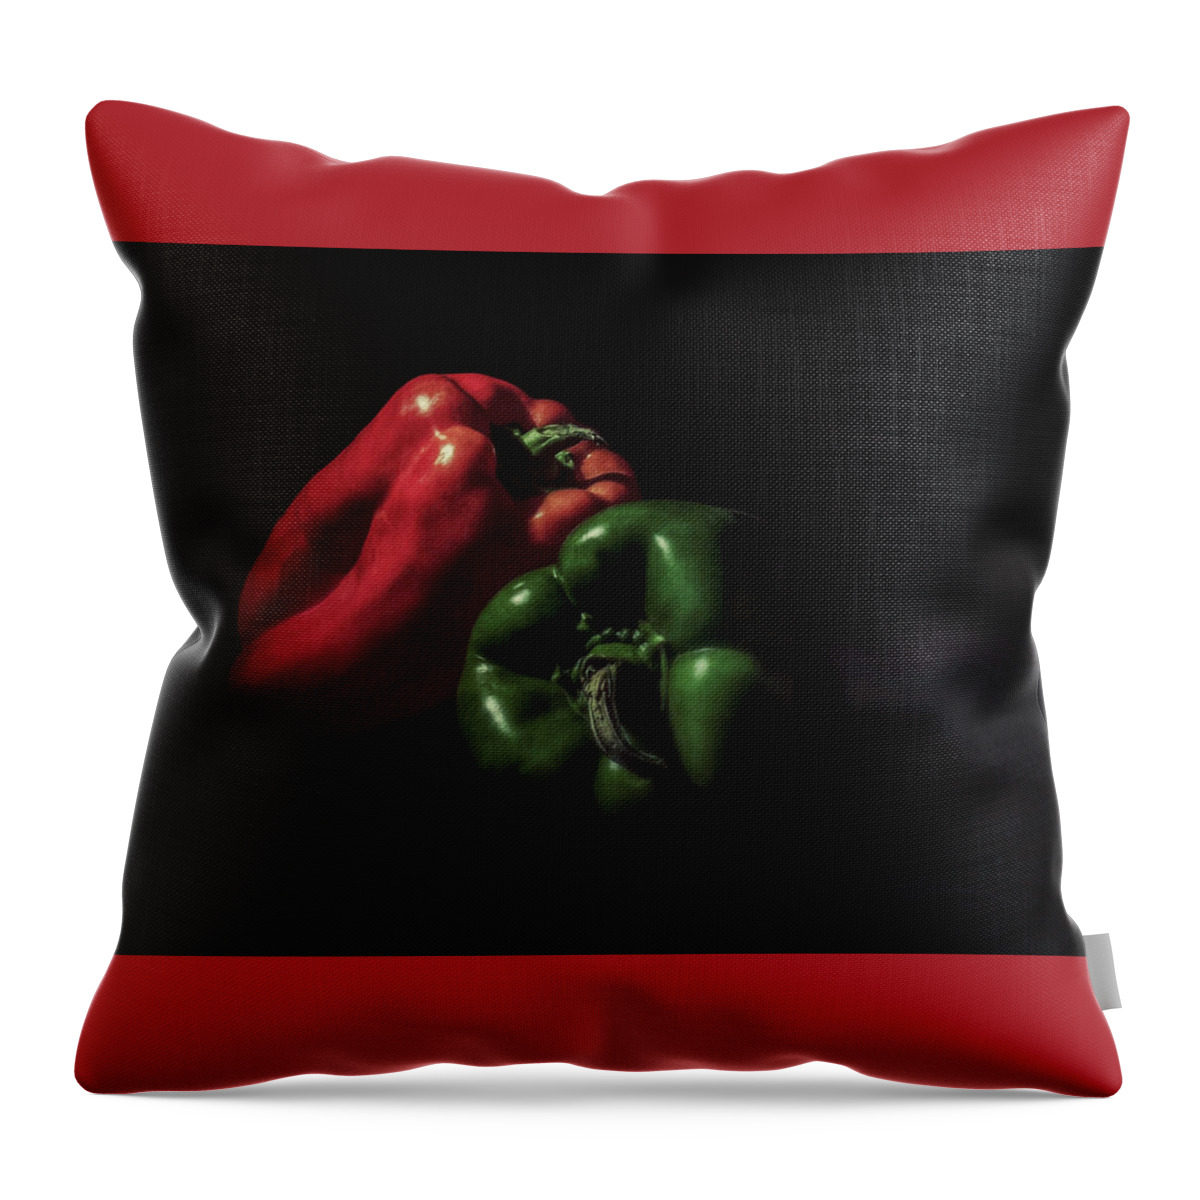 Peppers Throw Pillow featuring the photograph Peppers by Brenda Wilcox aka Wildeyed n Wicked